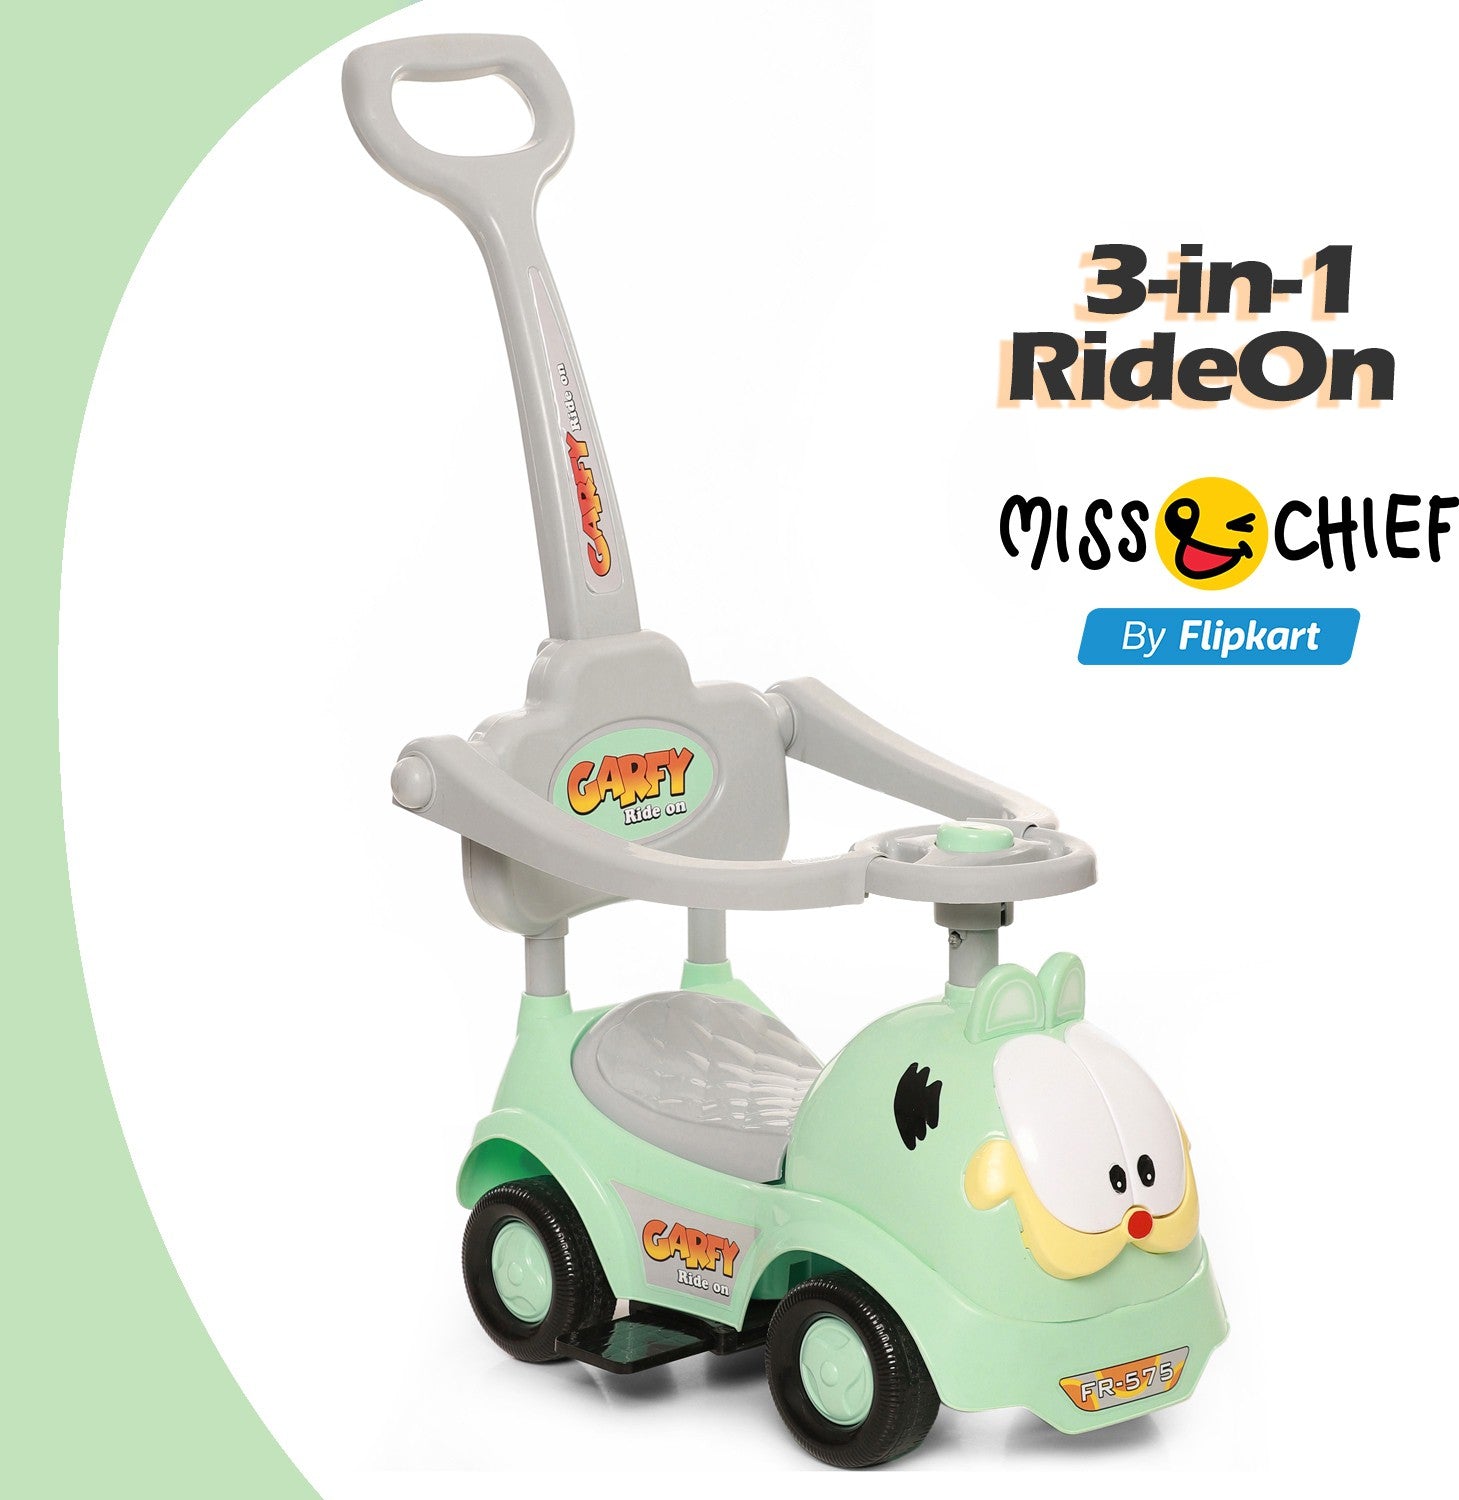 Push Car Rabbit Ride-on Toy Car Rider with Music Horn, Backrest and Under Seat Storage Utility Box for Boys and Girls of Age 1-3 Years